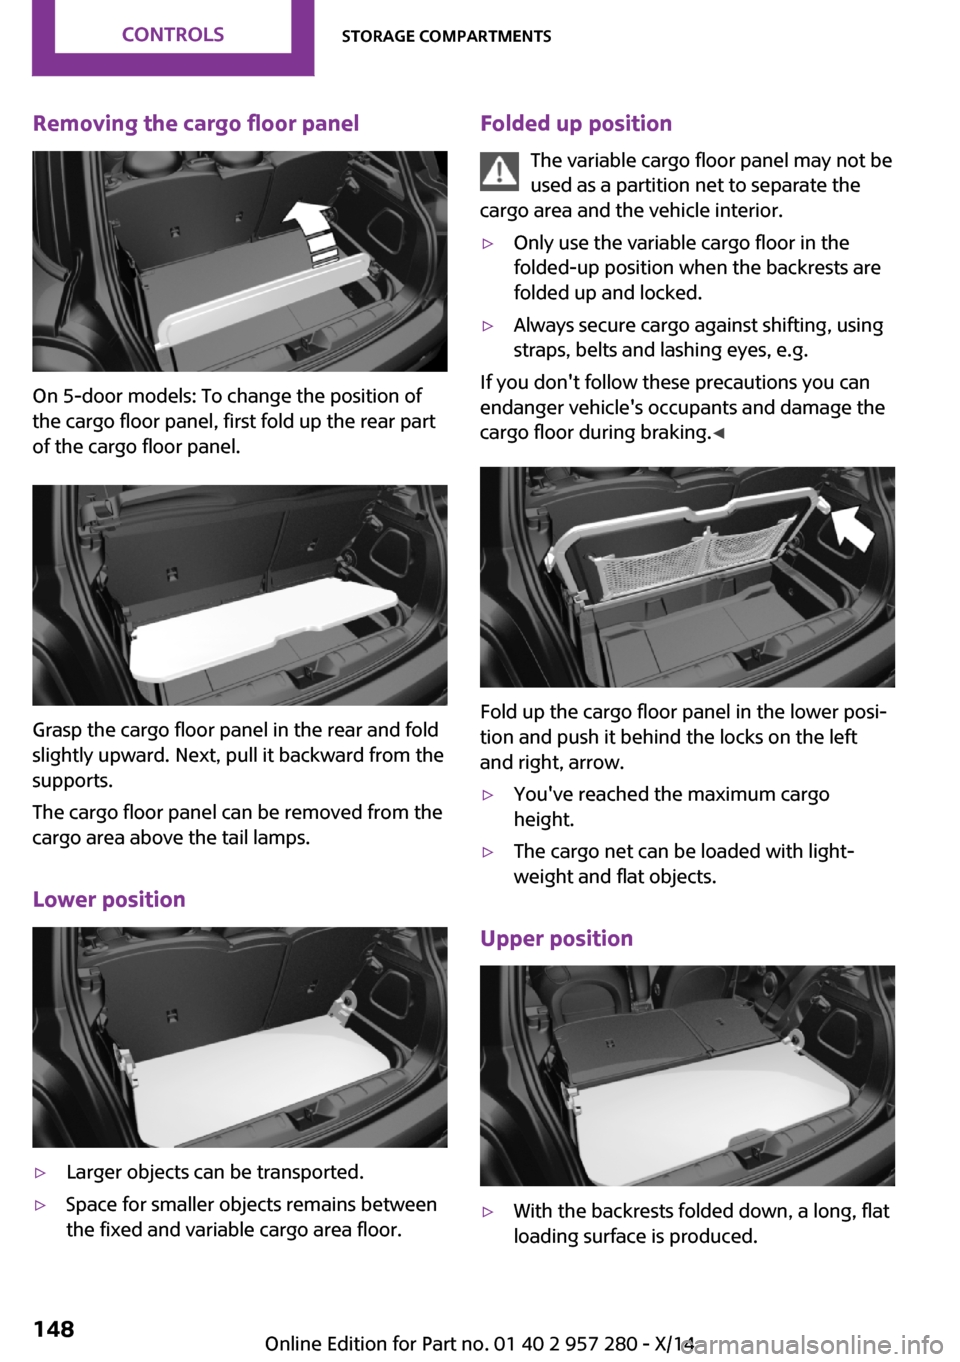 MINI 3 door 2014  Owners Manual Removing the cargo floor panel
On 5-door models: To change the position of
the cargo floor panel, first fold up the rear part
of the cargo floor panel.
Grasp the cargo floor panel in the rear and fold